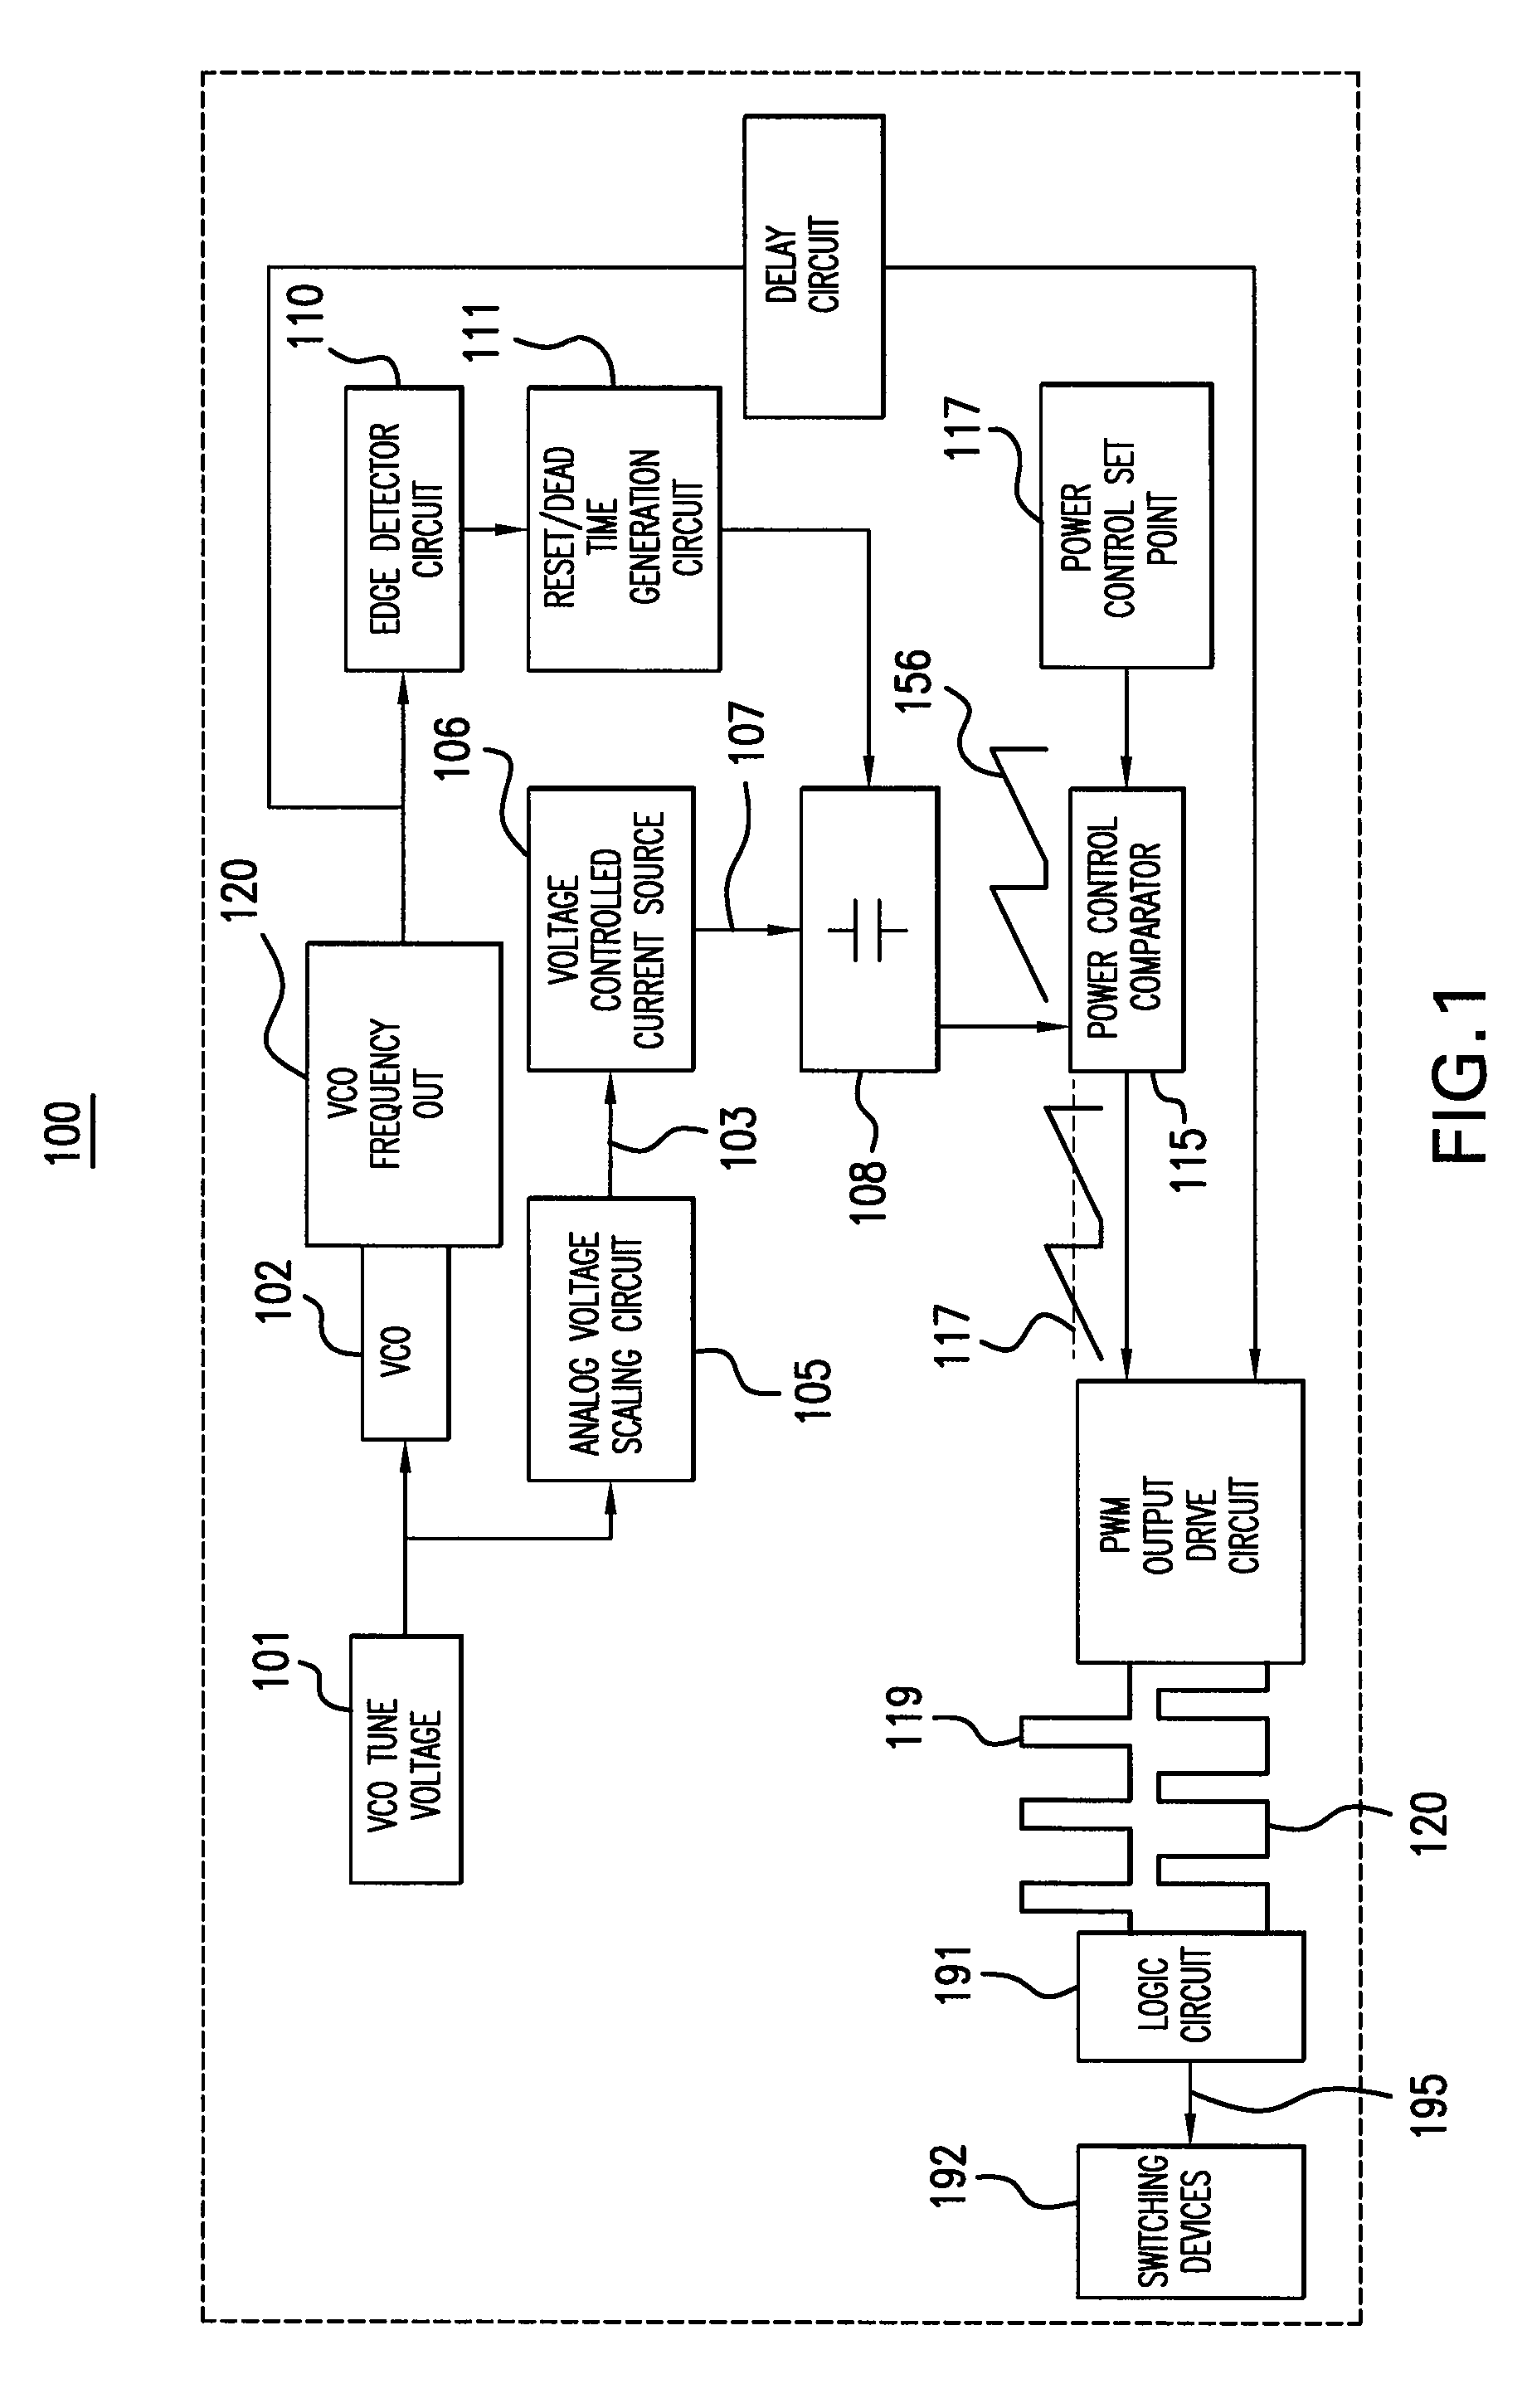 Automatic frequency compensation for pulse width modulated RF level control